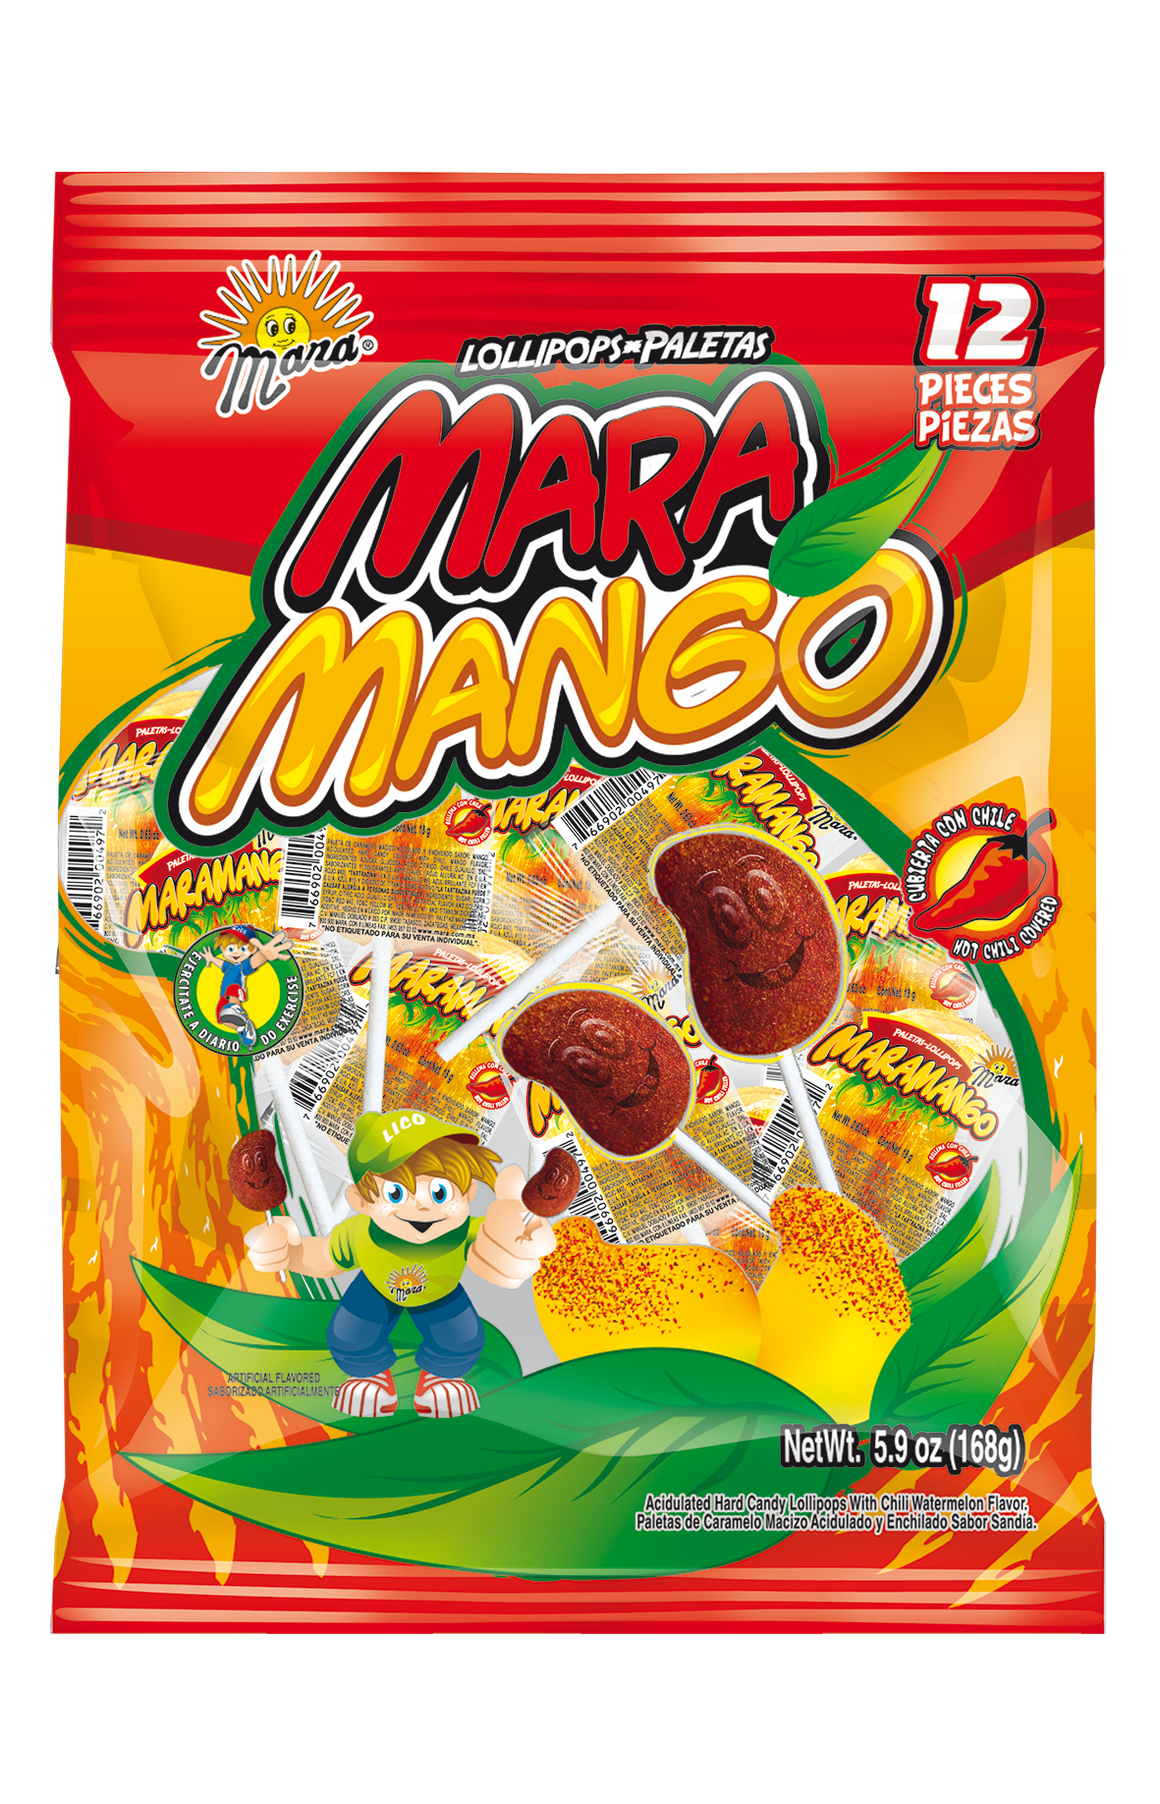 All City Candy Dulces Mara Mara Mango Con Chile 10 piece Pops 5.9 oz. Bag - For fresh candy and great service, visit www.allcitycandy.com